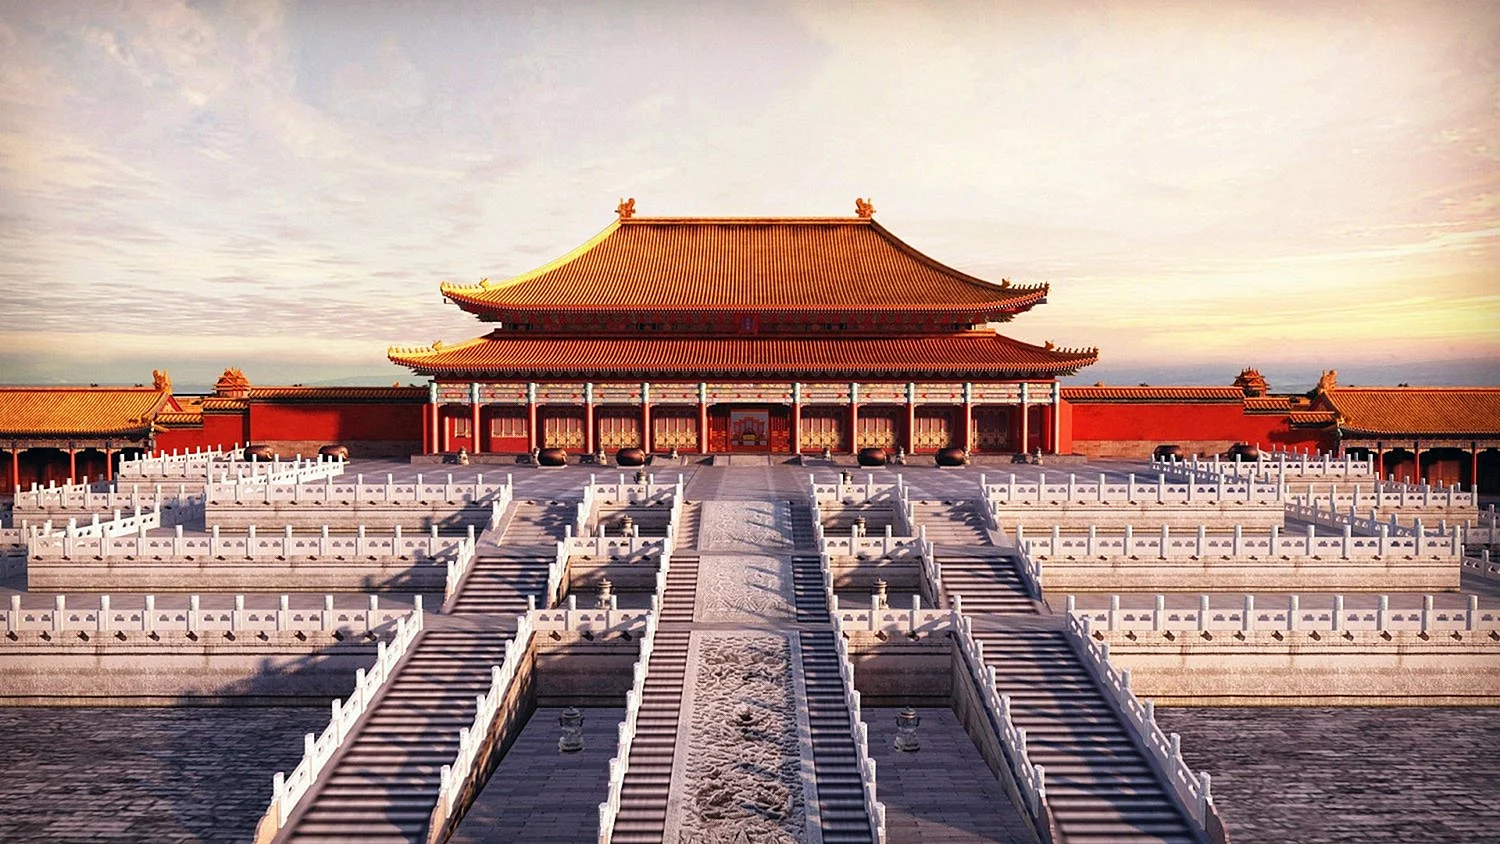 The Imperial Palace China Wallpaper